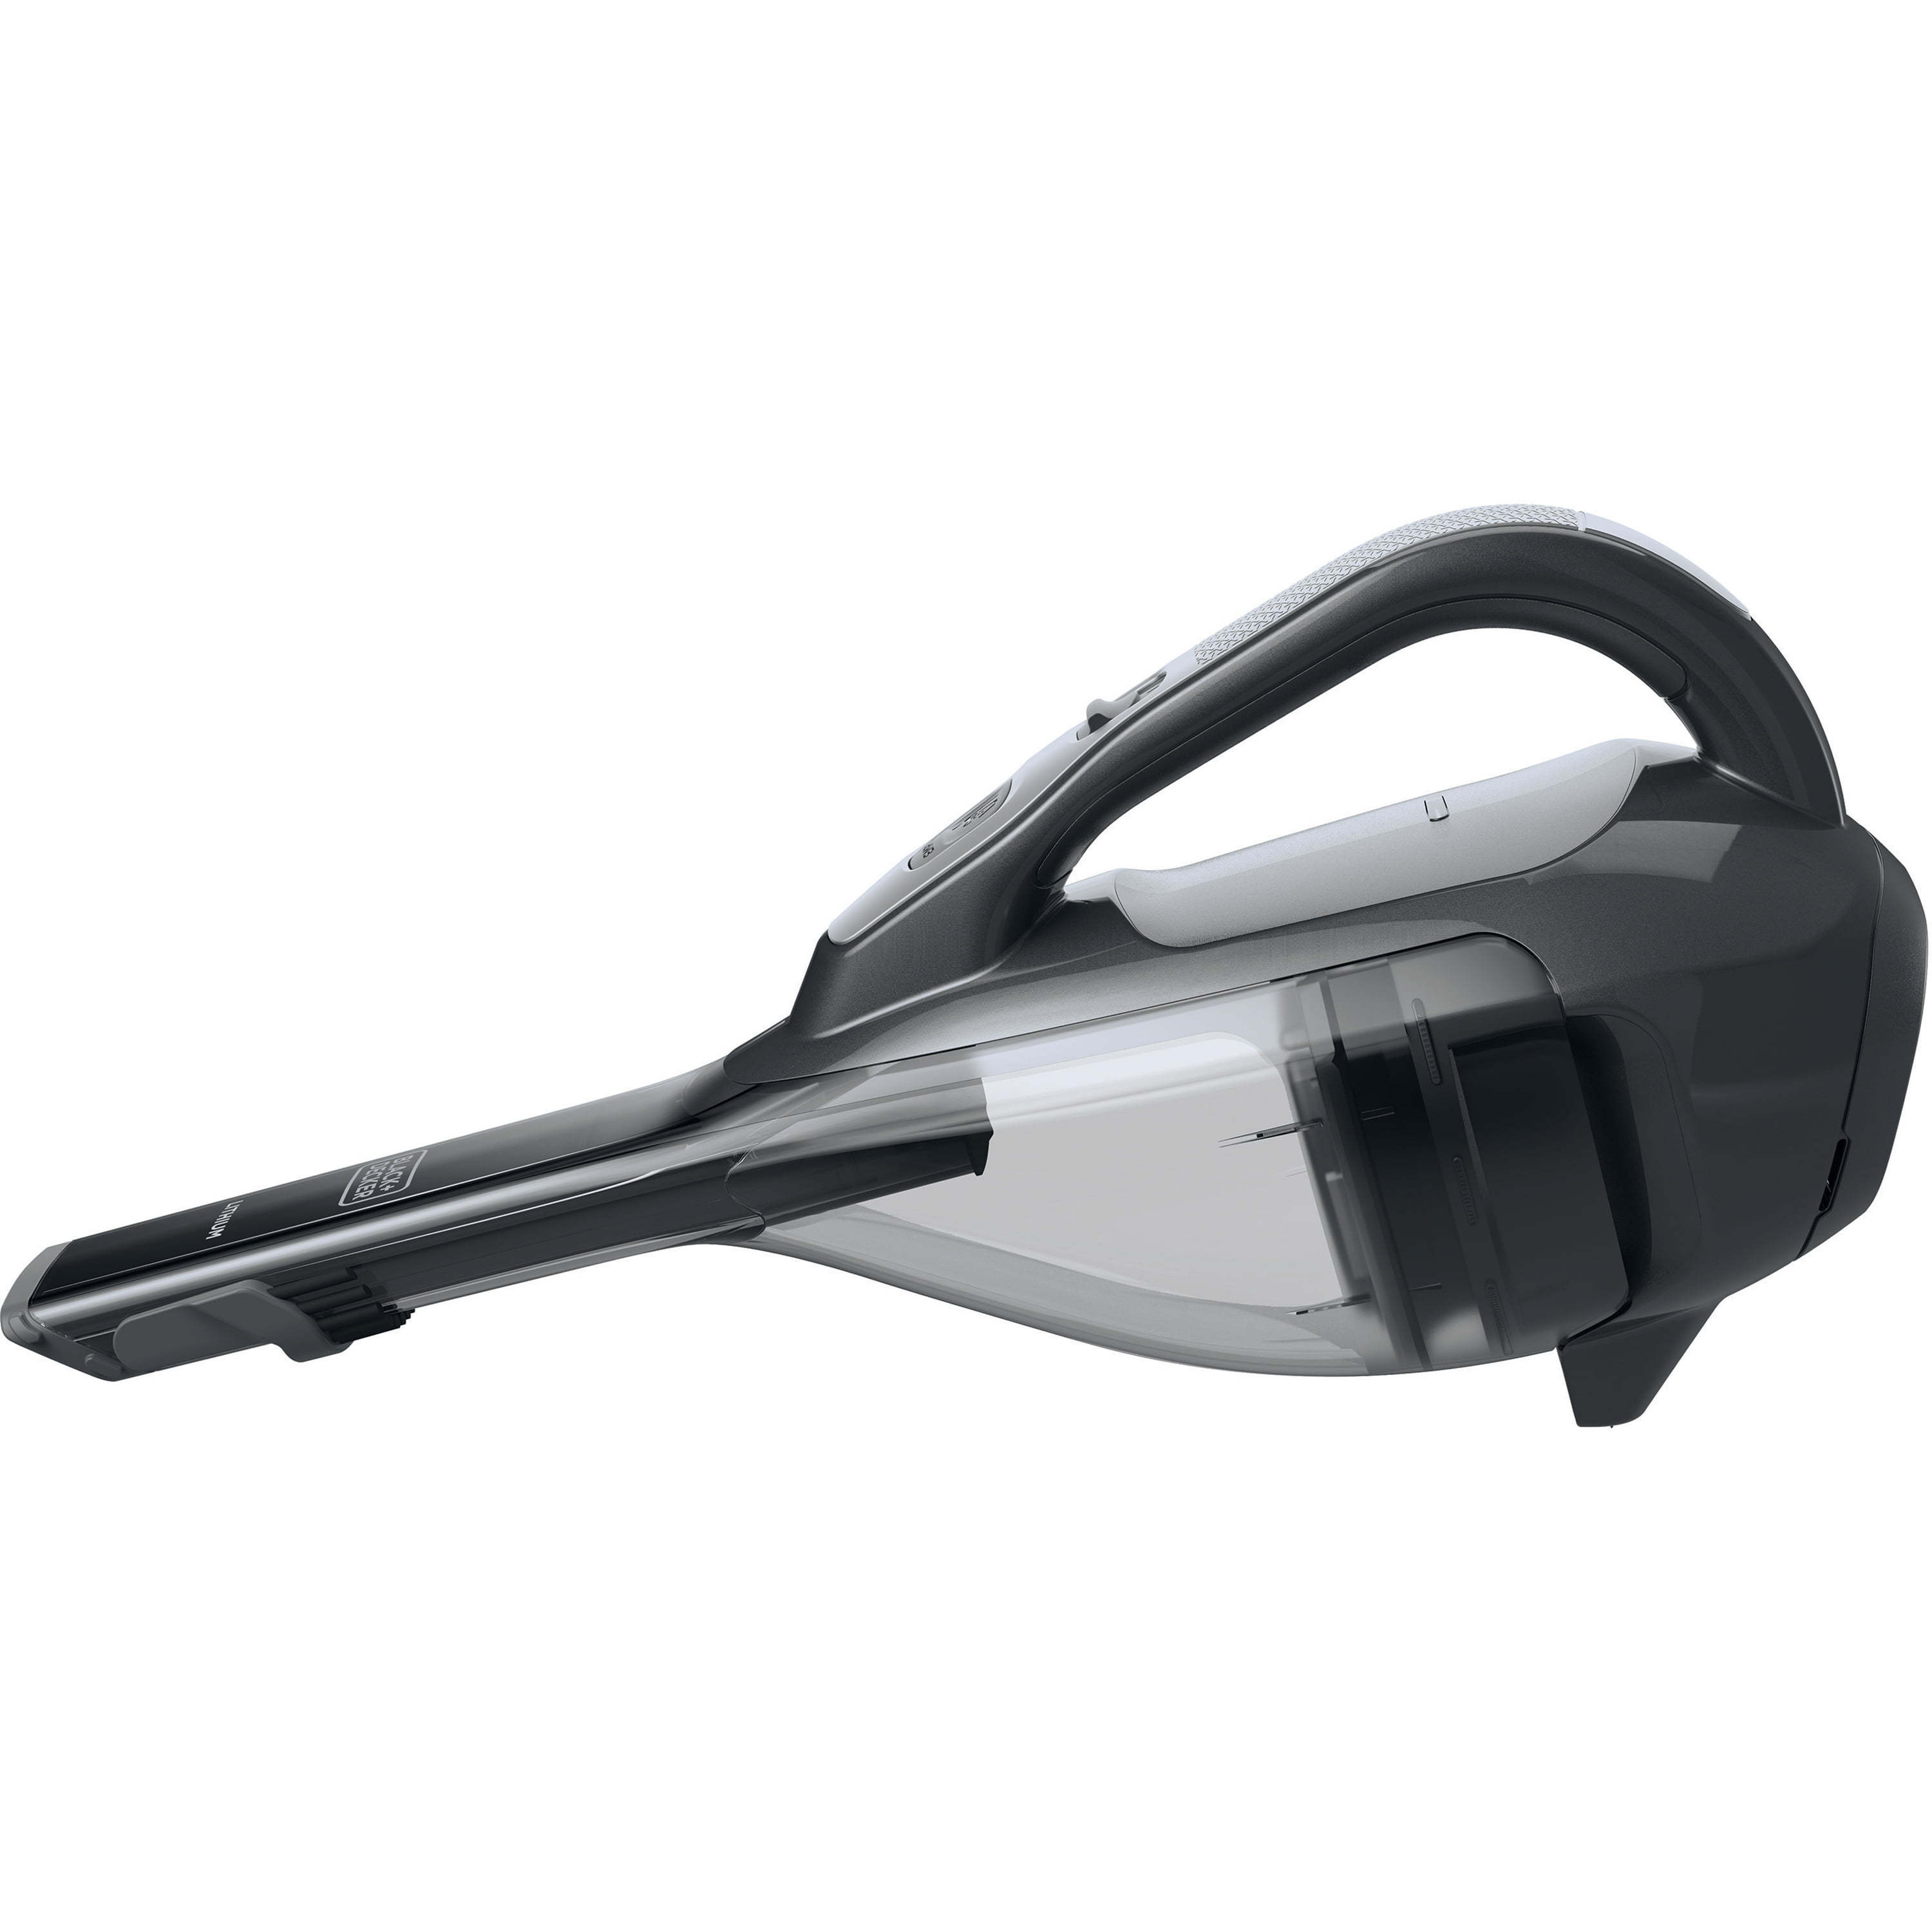 Black+Decker Dustbuster Bagless Cordless Cyclonic Filter Hand Vacuum - Ace  Hardware